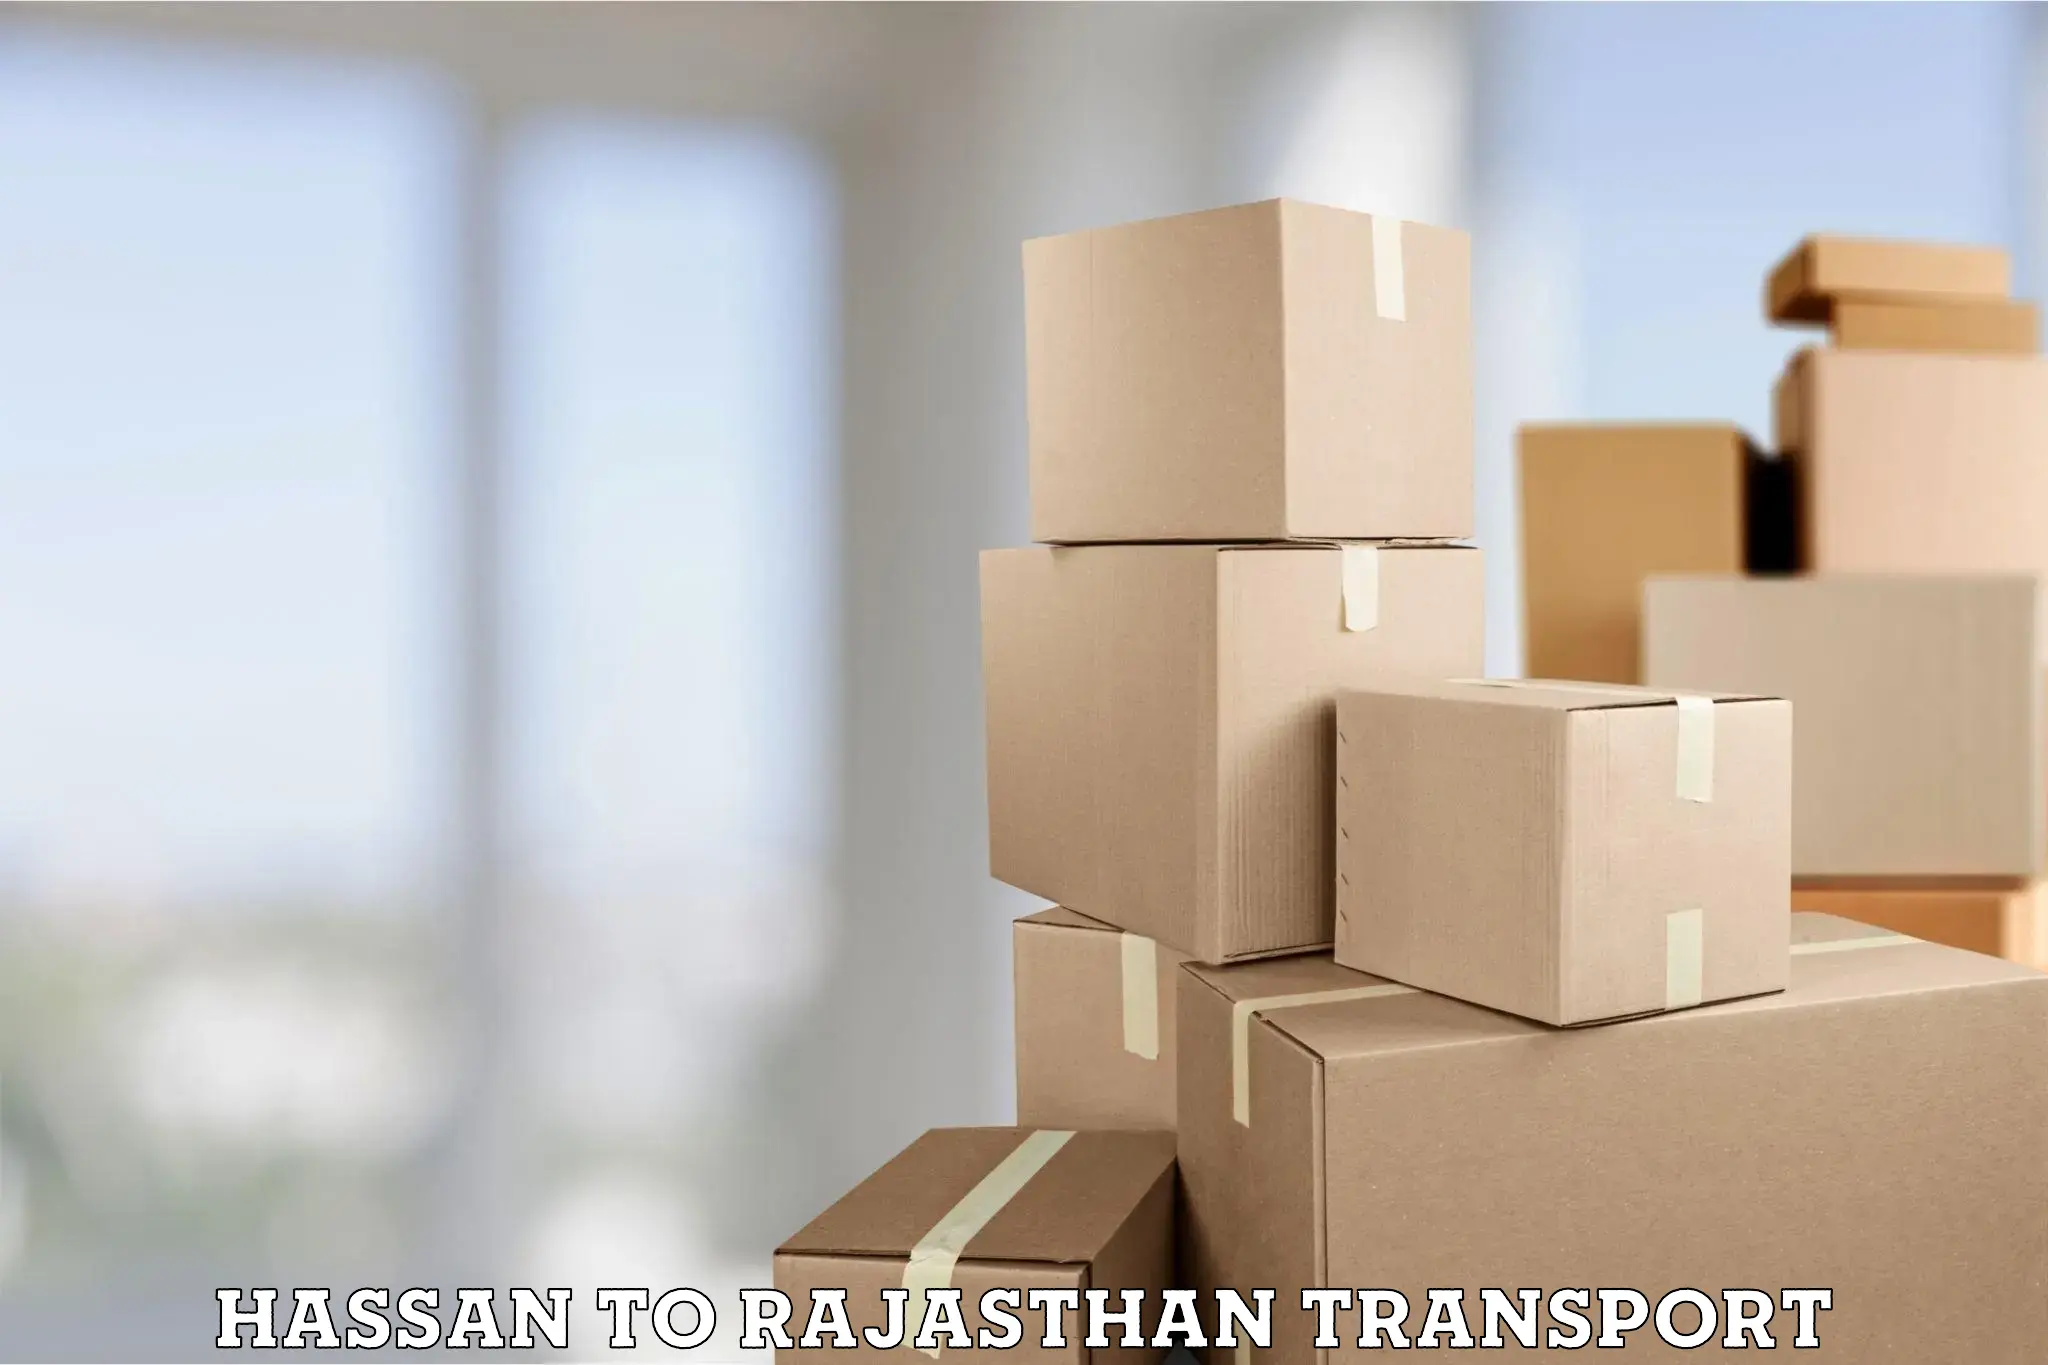 Transport in sharing Hassan to Bharatpur